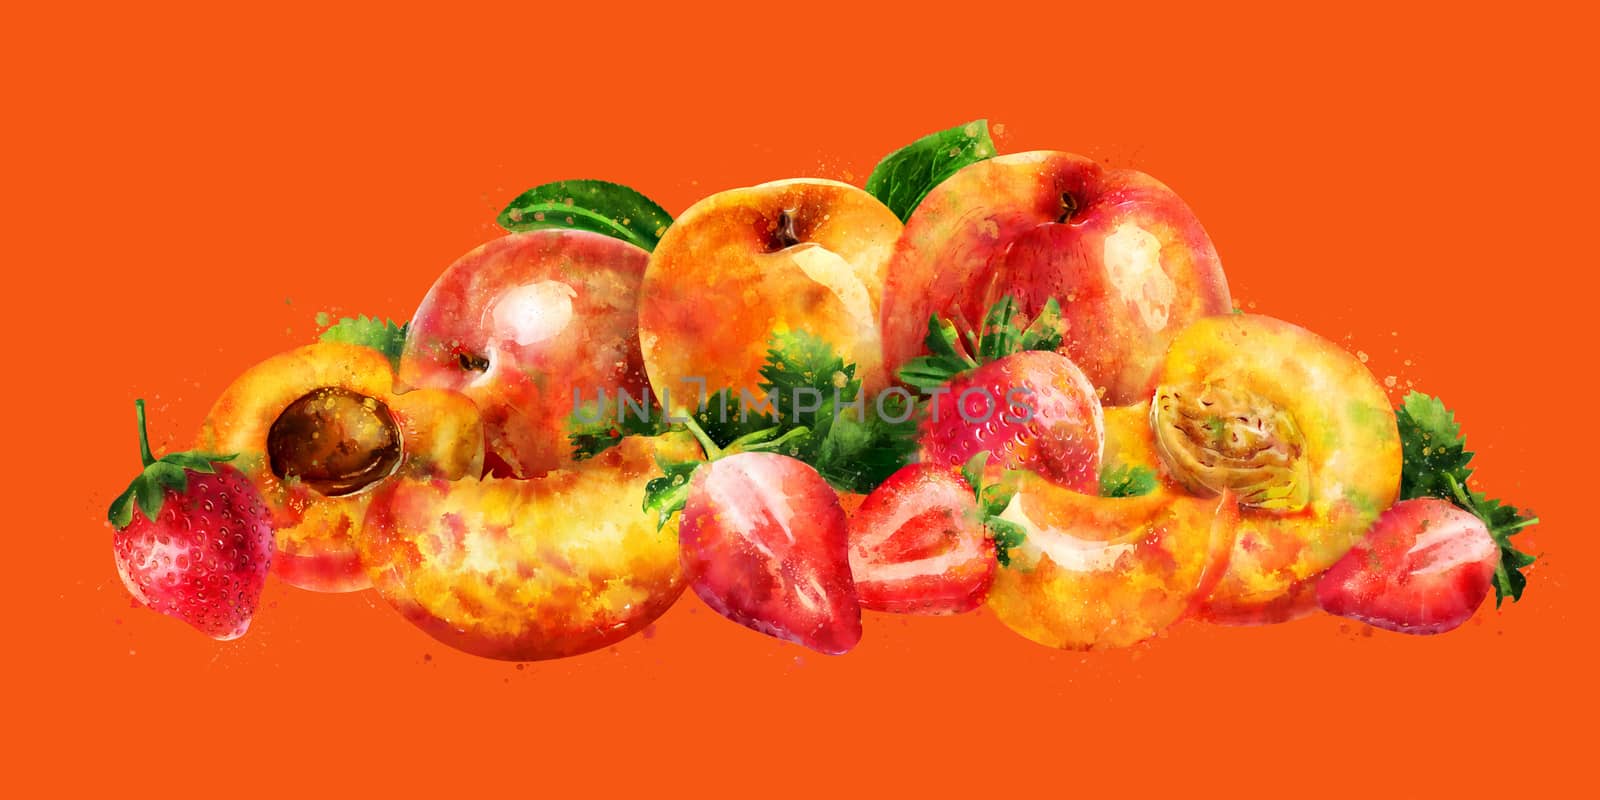 Apricot, peach and strawberry on orange background. Watercolor illustration by ConceptCafe